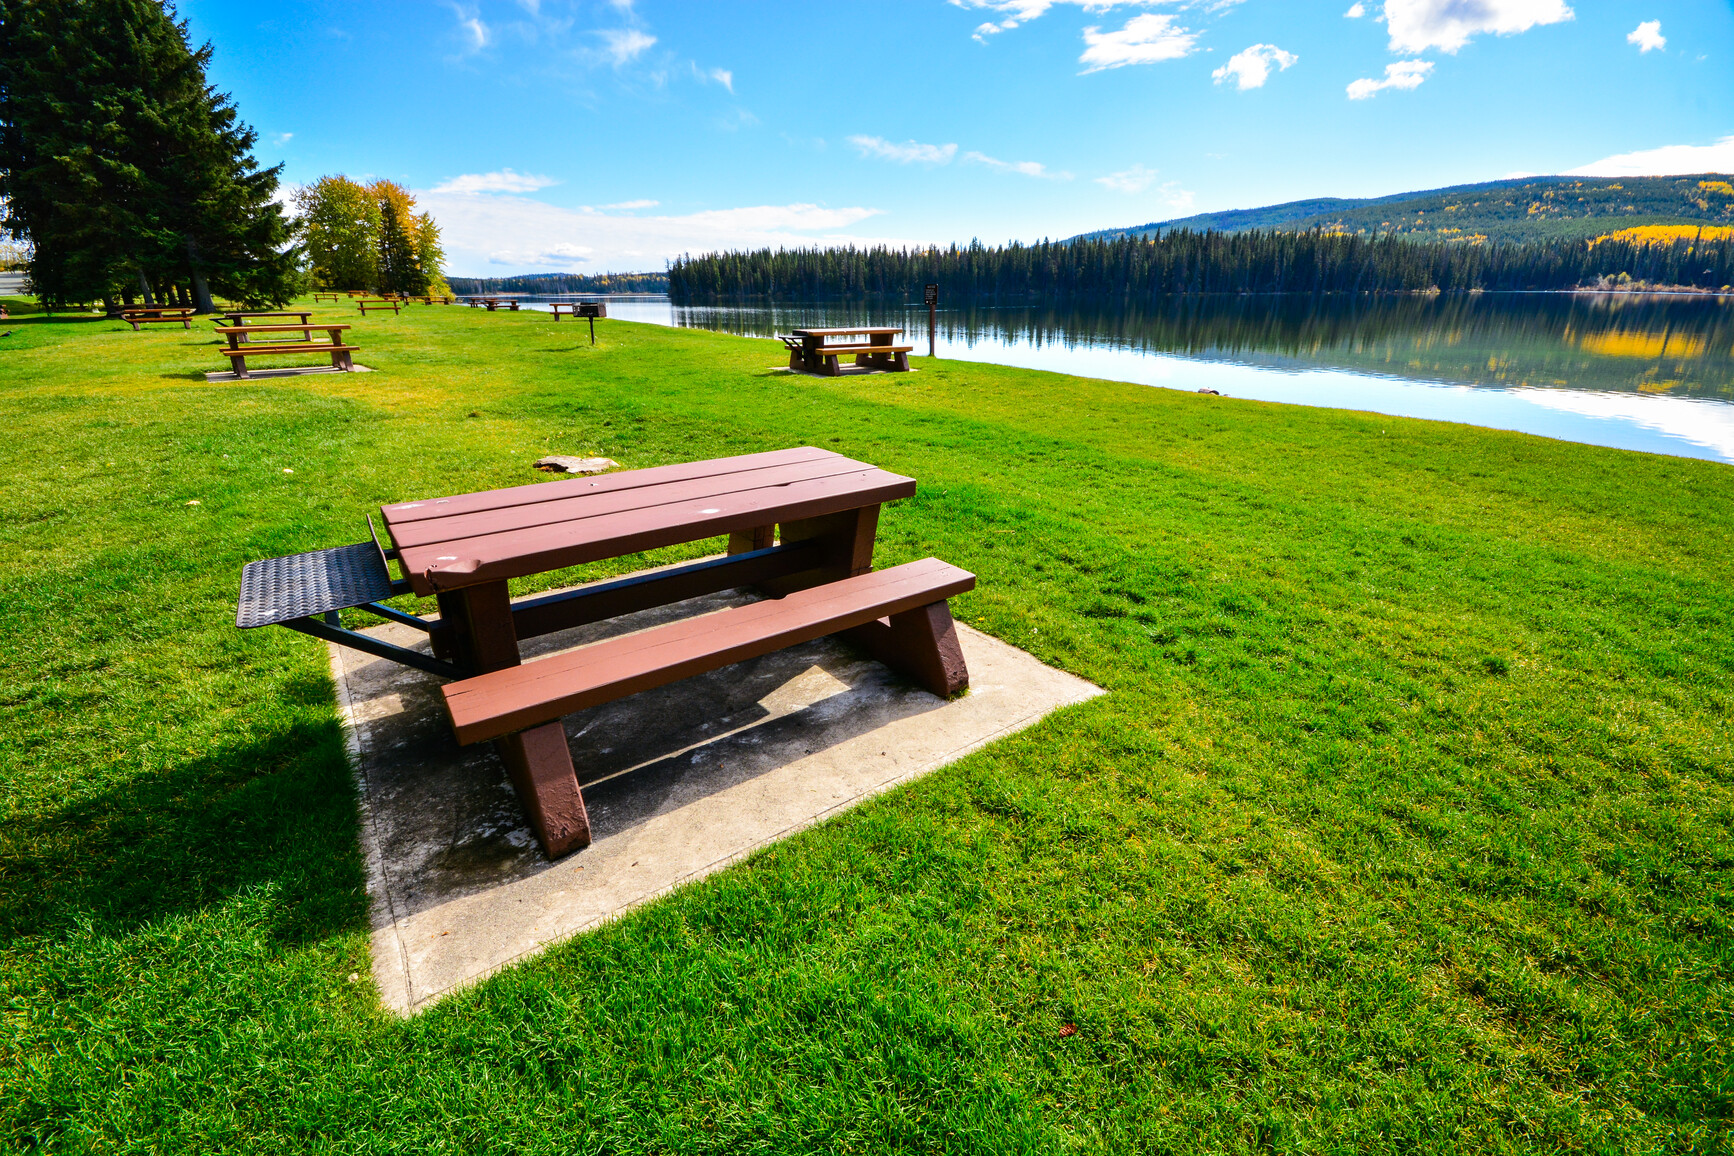 Picnic area of park. Several picnic tables in foreground.  Lake and mountains in view.